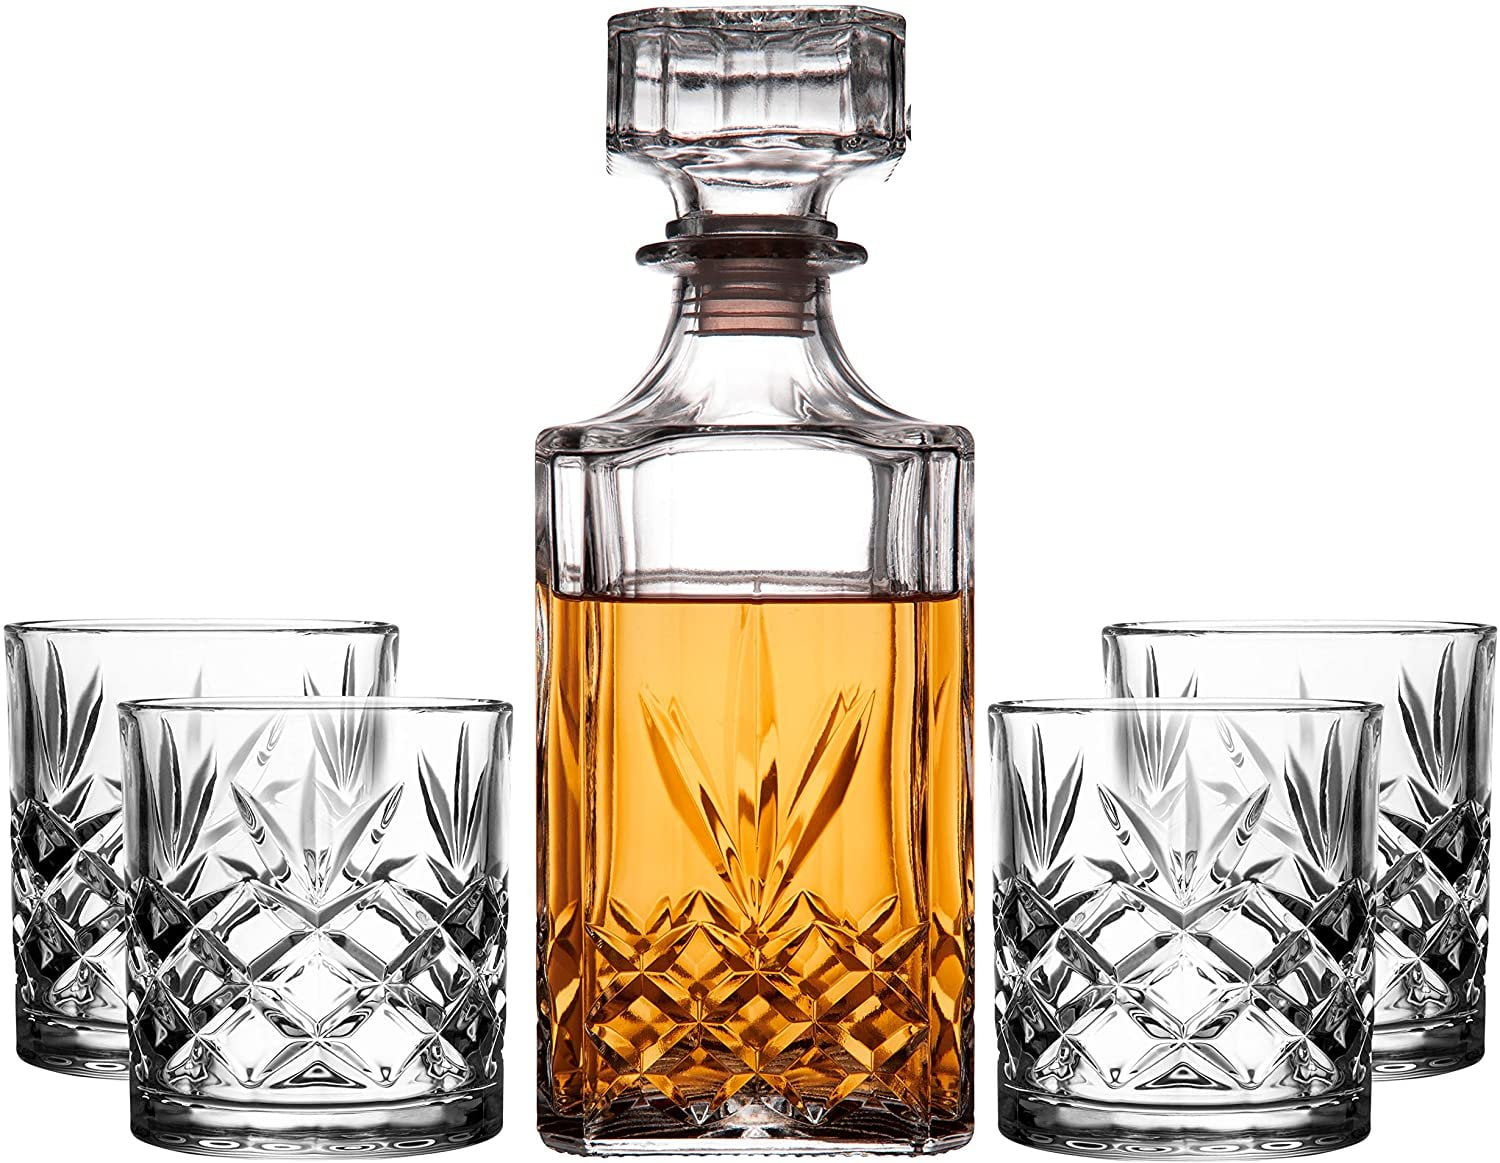 Perfect Whiskey Decanter Set for Scotch Bourbon With Magnetic Gift Box High-end European Style Whisky Decanter Set Exquisite Diamond Design Wine Decanter Carafe 4 Whisky Glasses Tumbler Set